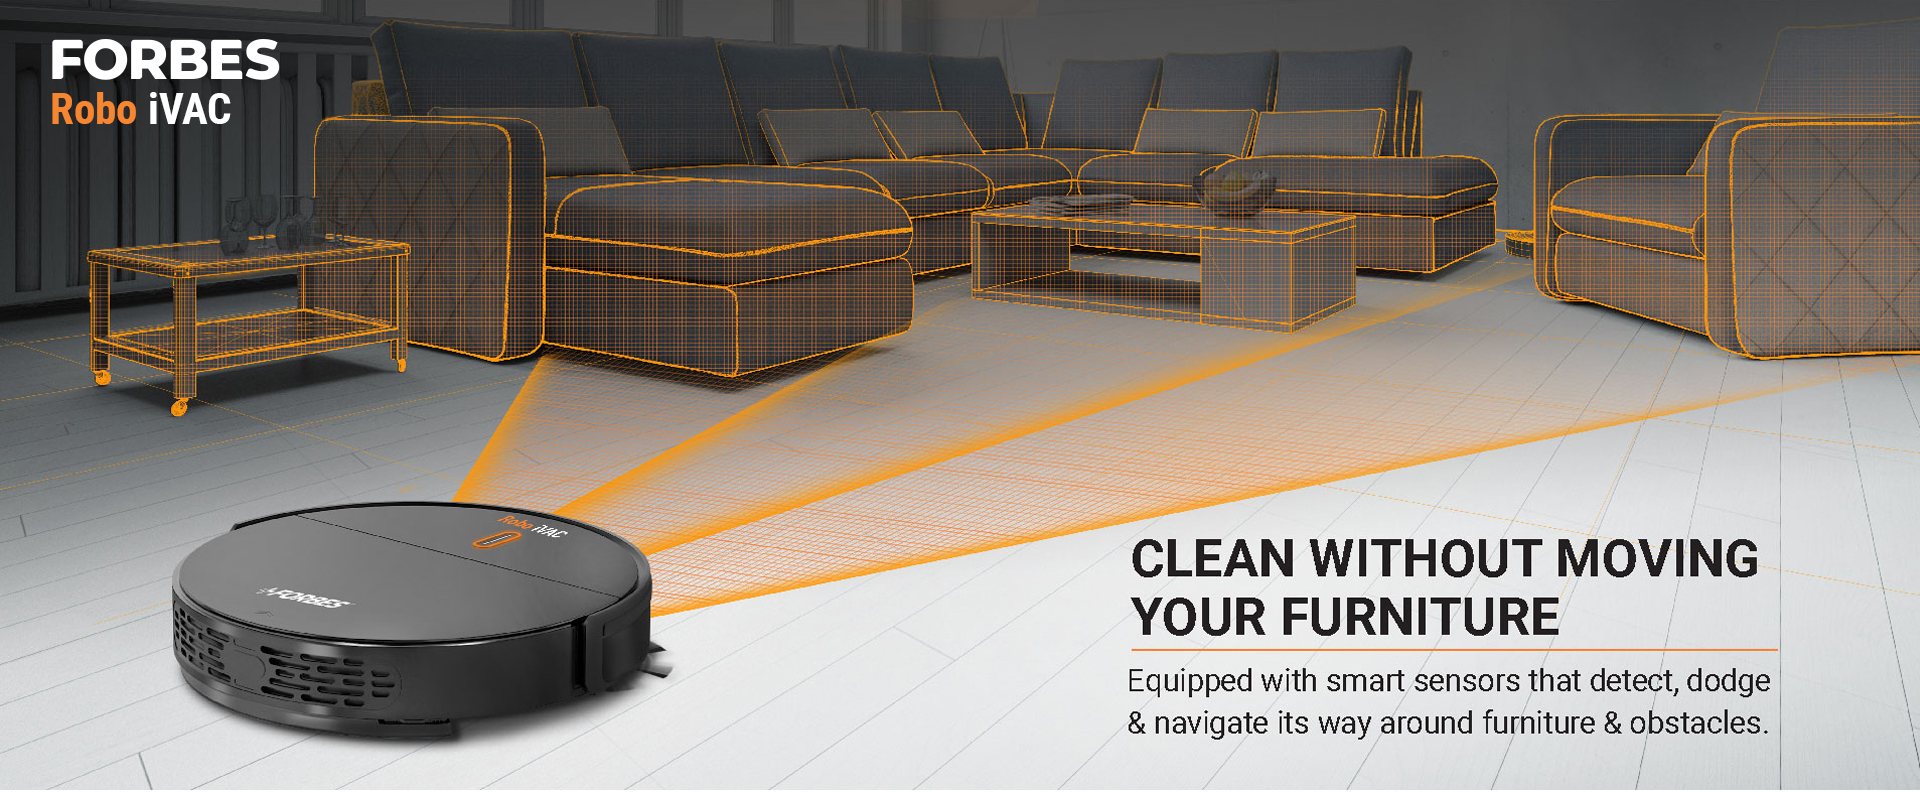 Equipped with smart sensors that detect, dodge & navigate its way around furniture & obstacles.